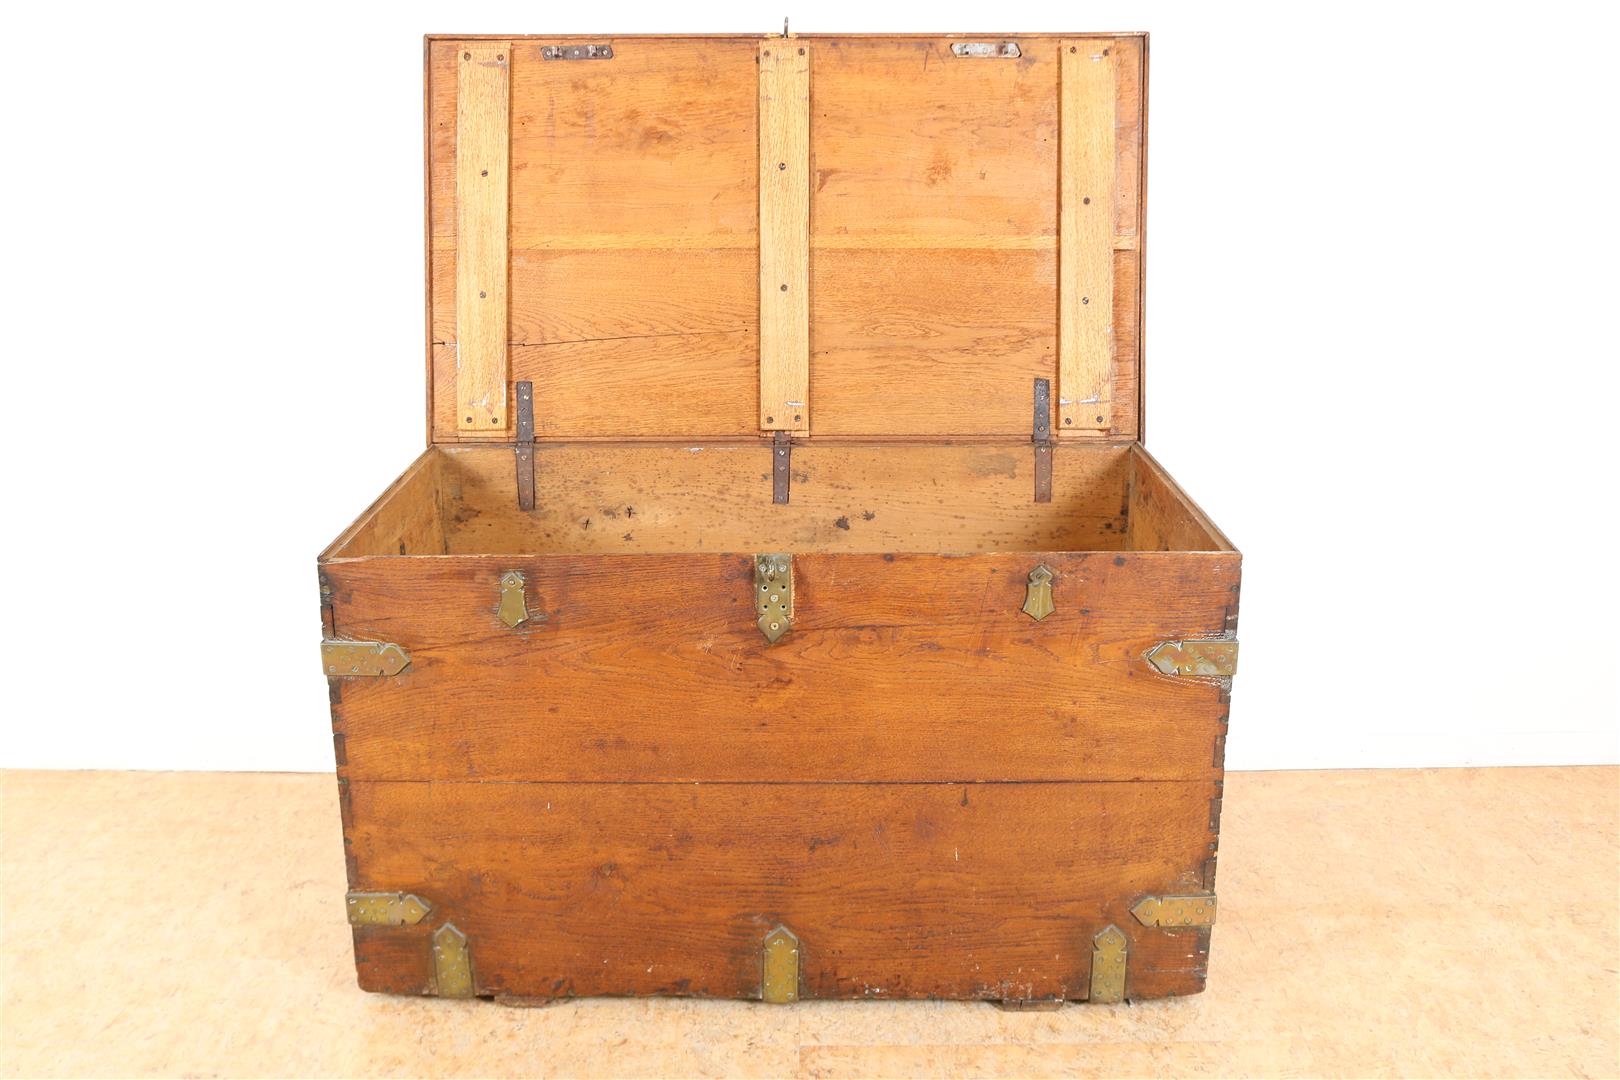 Oak Colonial blanket chest with brass fittings and handles, late 19th century, 58 x 105 x 60 cm. - Image 3 of 4